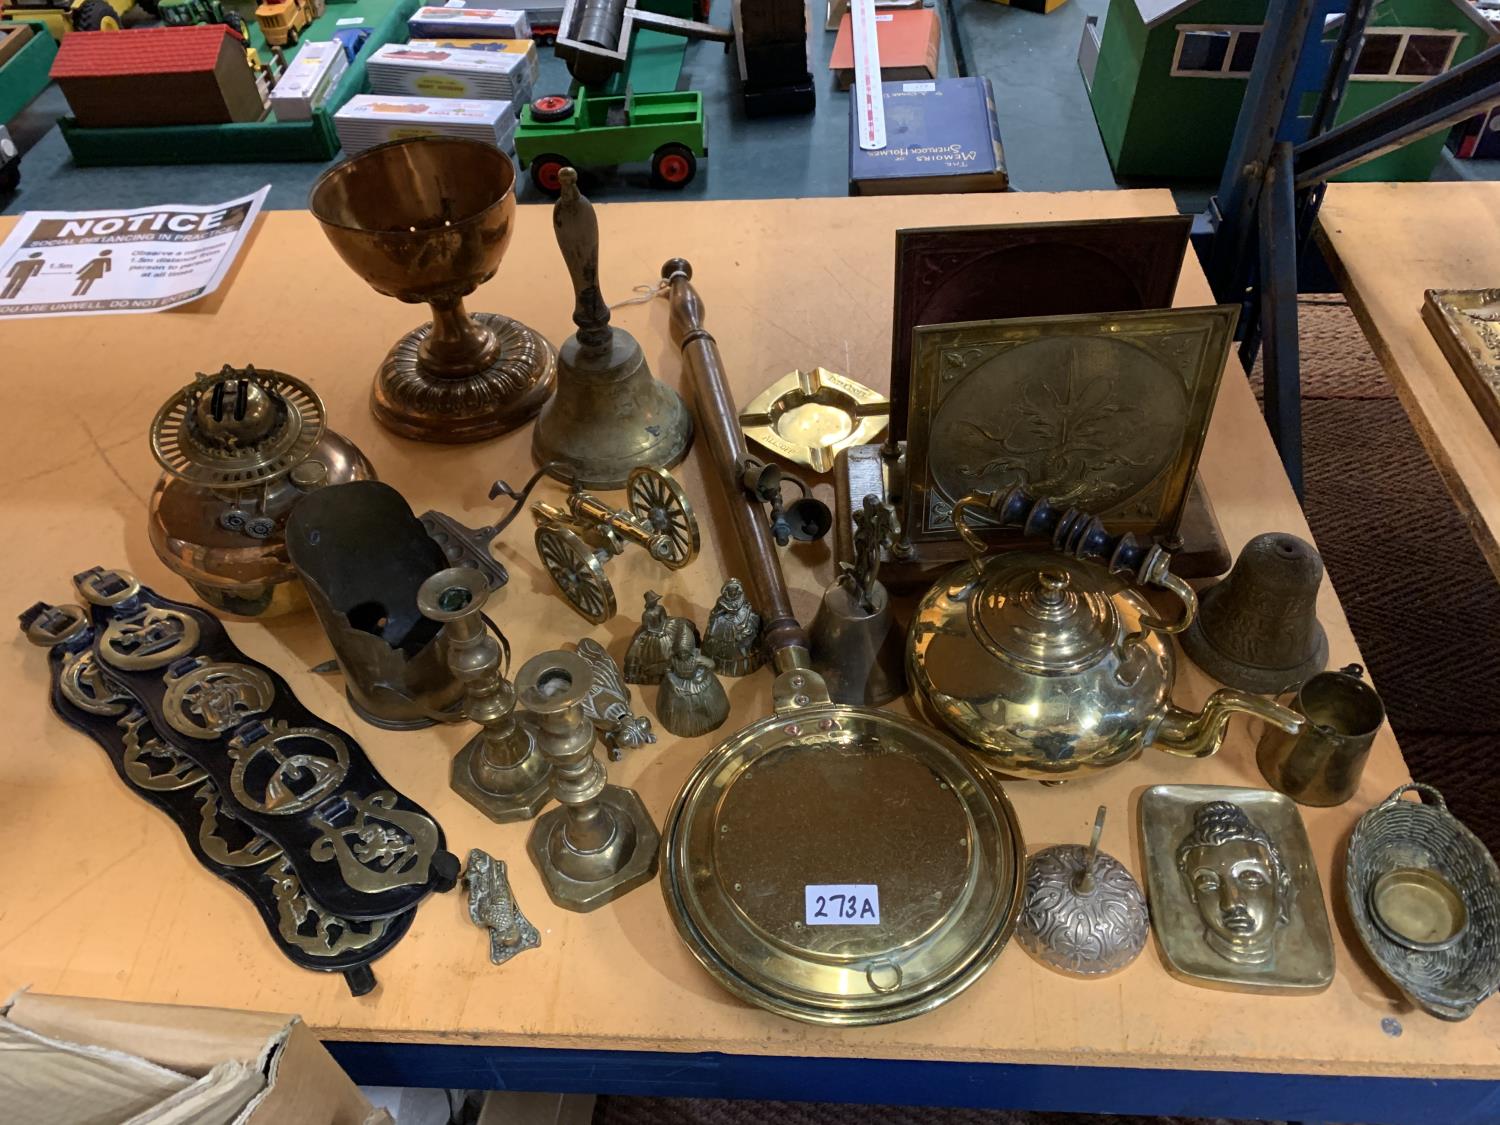 A LARGE QUANTITY OF BRASSWARE TO INCLUDE A BELL, HORSE BRASSES, KETTLE, CANDLESTICKS, CANNON, LAMP